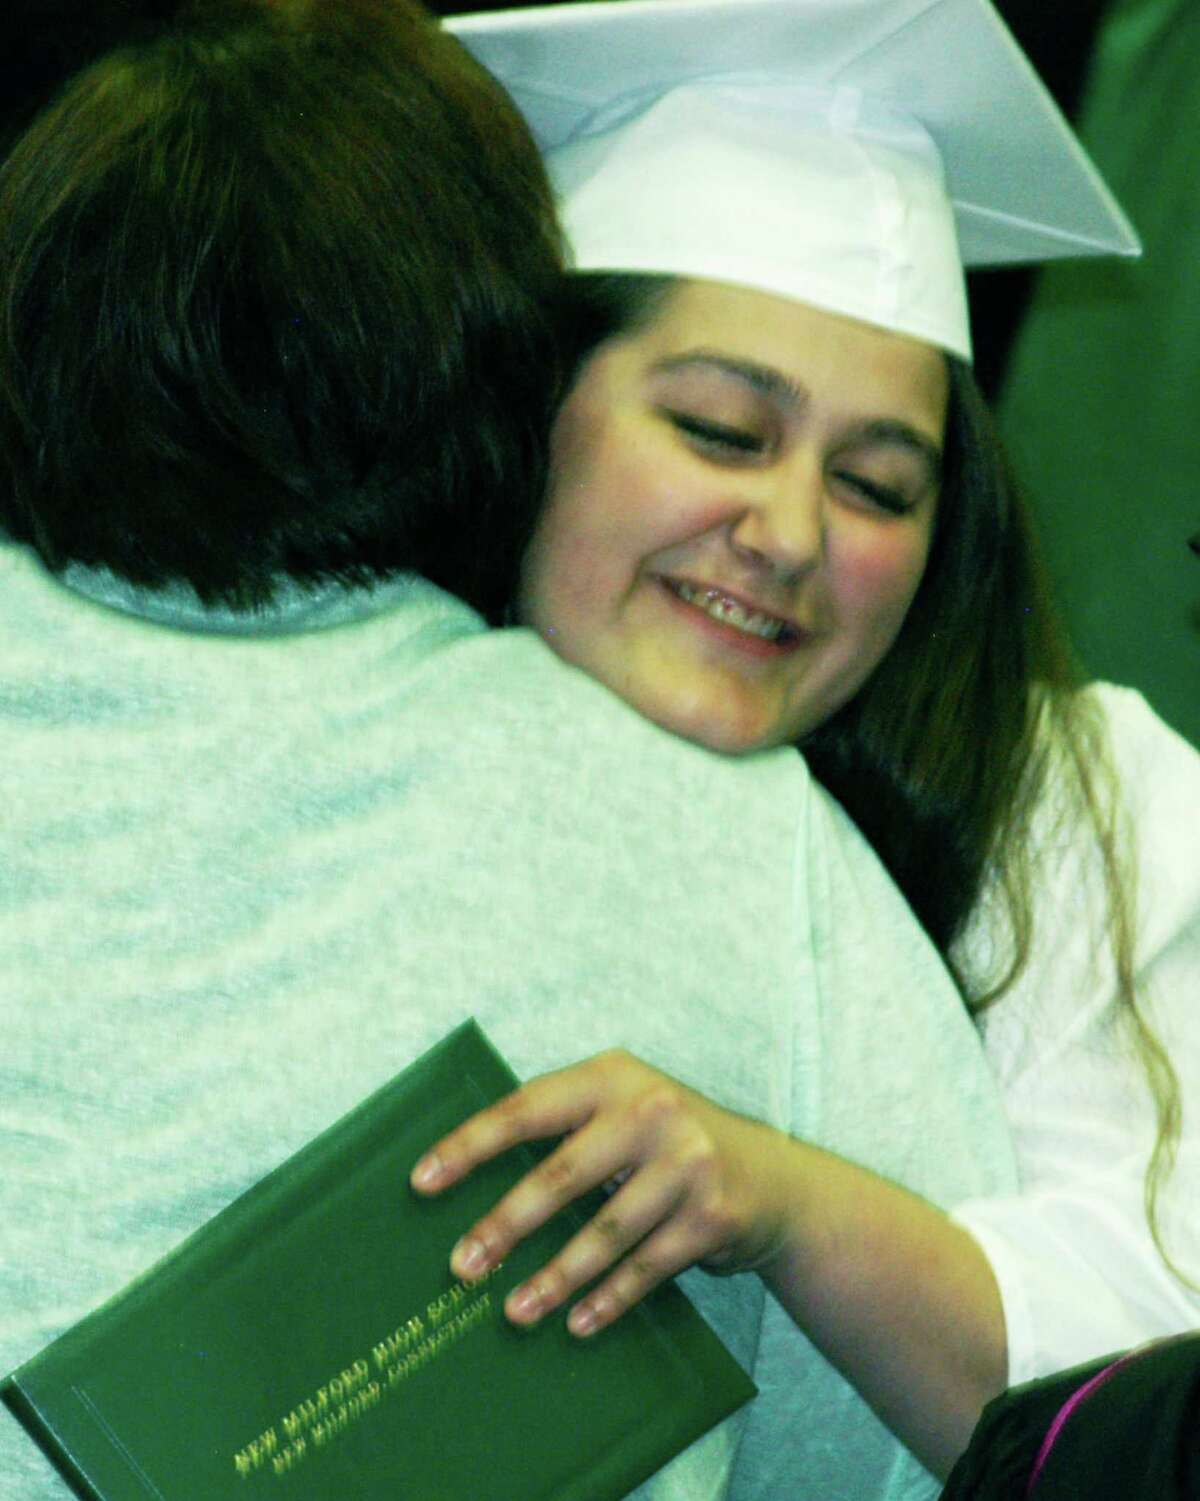 Amber Levine shares an emotional enmbrace Saturday with Class of 2015 advisor Daisy Norlander moments after receiving her diploma during the New Milford High School commencement ceremony at the O'Neill Center on the campus of Western Connecticut State University in Danbury. June 20, 2015